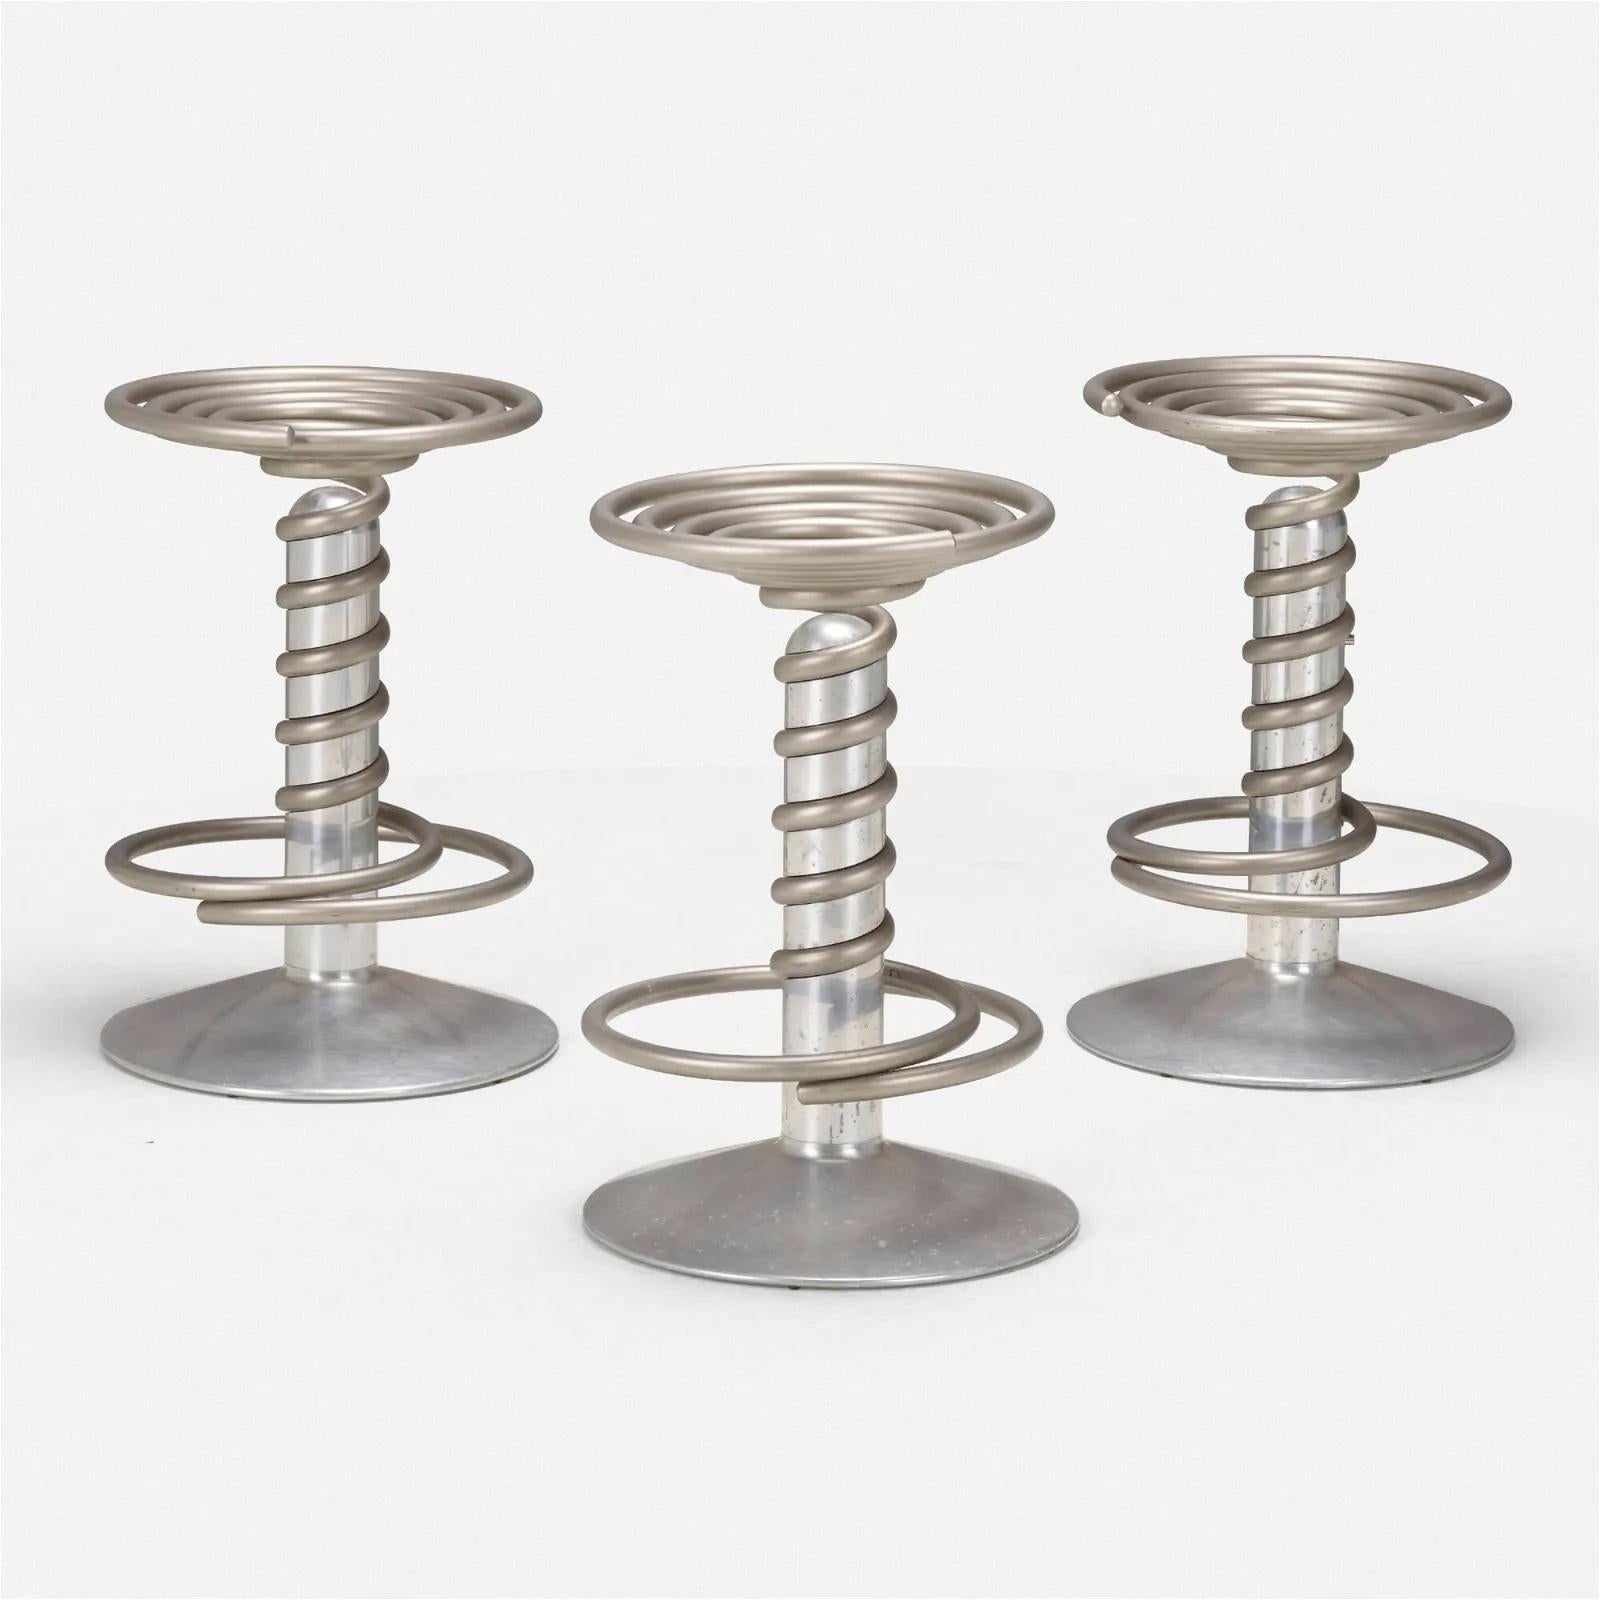 Ron Arad Screw Stools Set of Three Driade Italy Sculpture Industrial Stainless For Sale 1